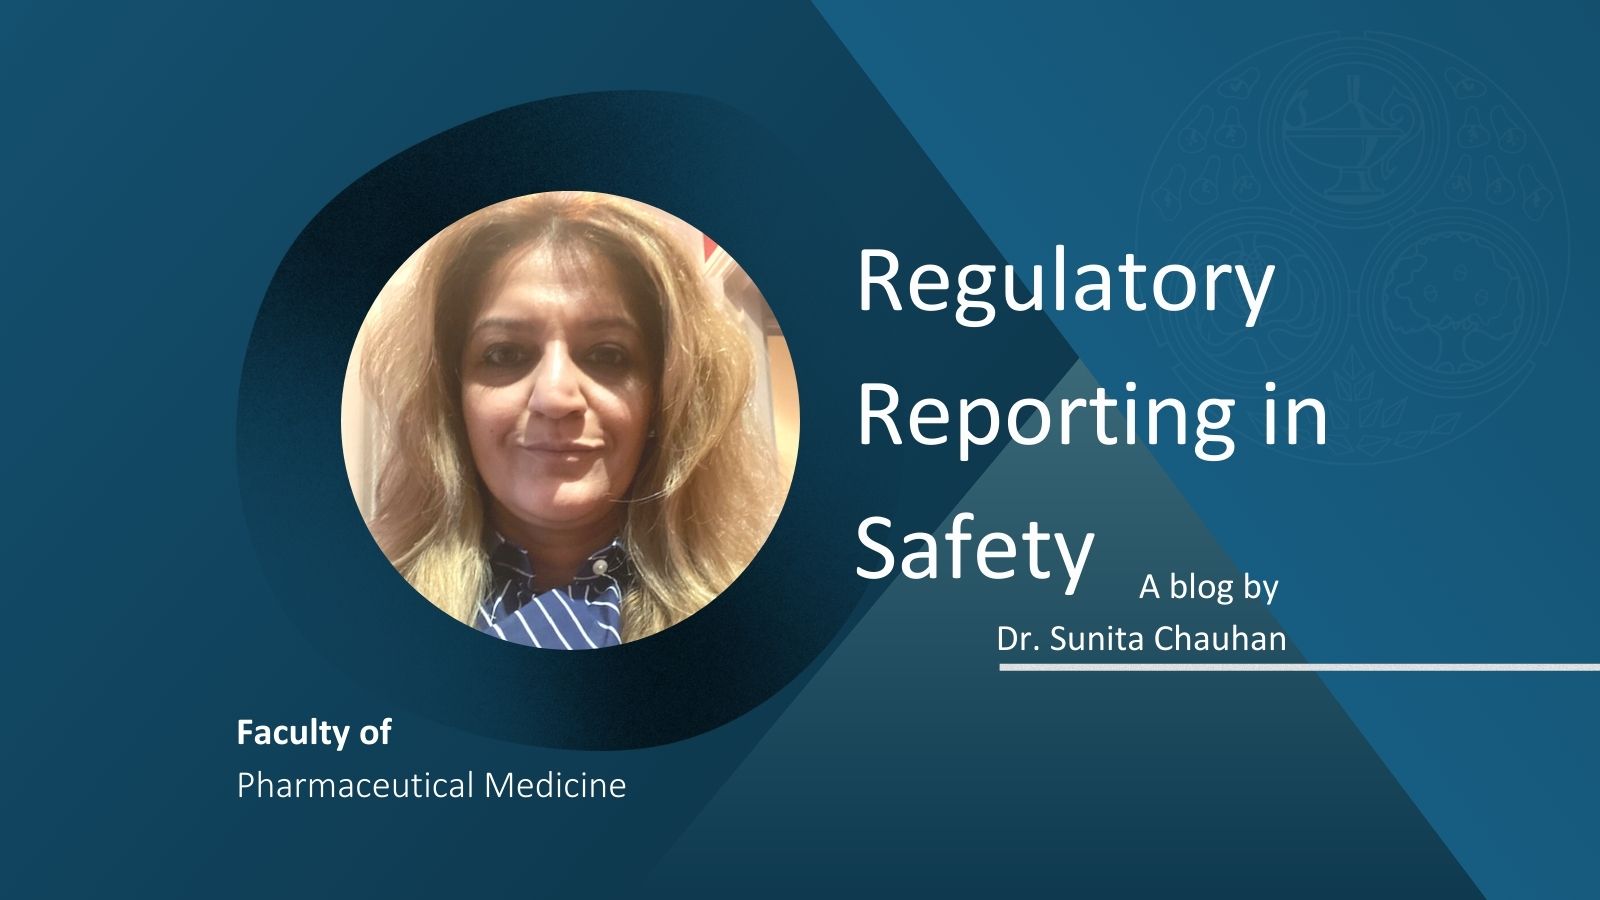 Banner image for Dr Sunita Chauhan's blog titled Regulatory Reporting in Safety. The banner contains a headshot of Sunita and the Faculty of Pharmaceutical Medicine logo.